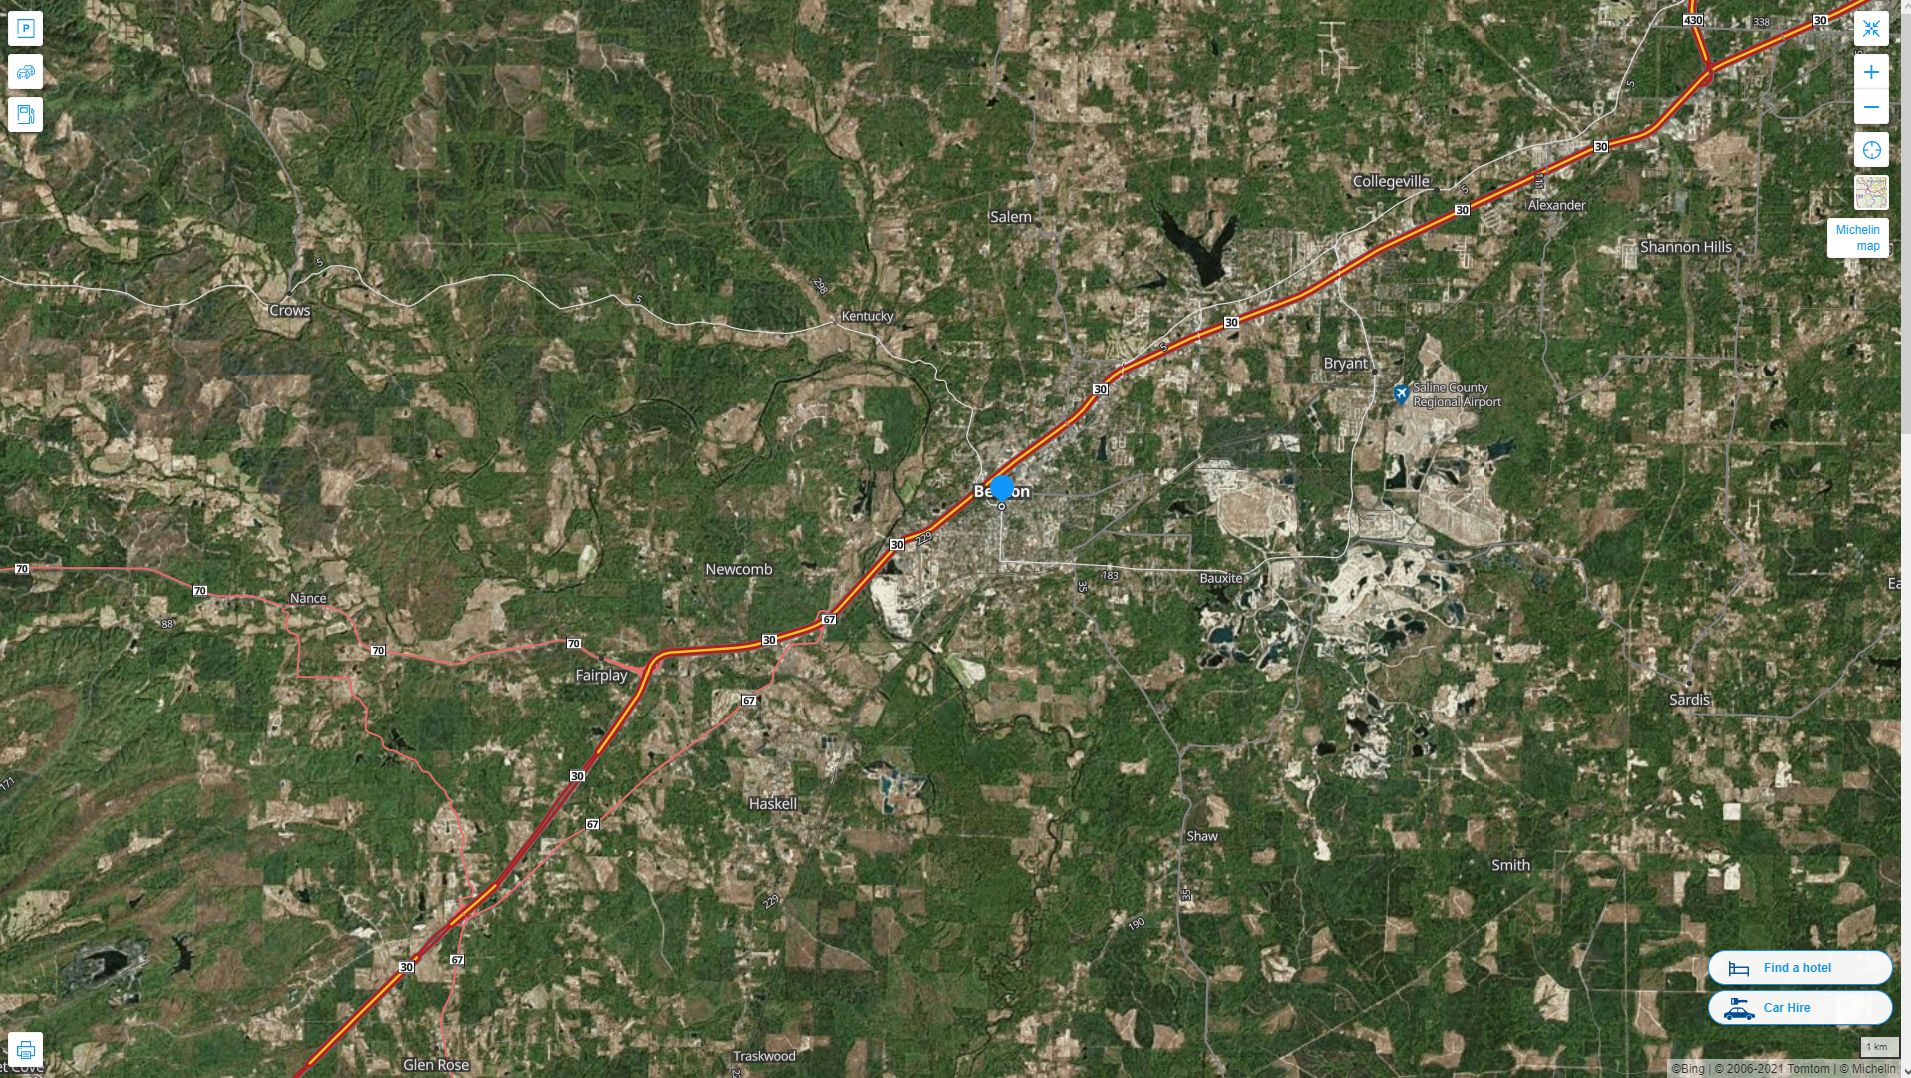 Benton Arkansas Highway and Road Map with Satellite View